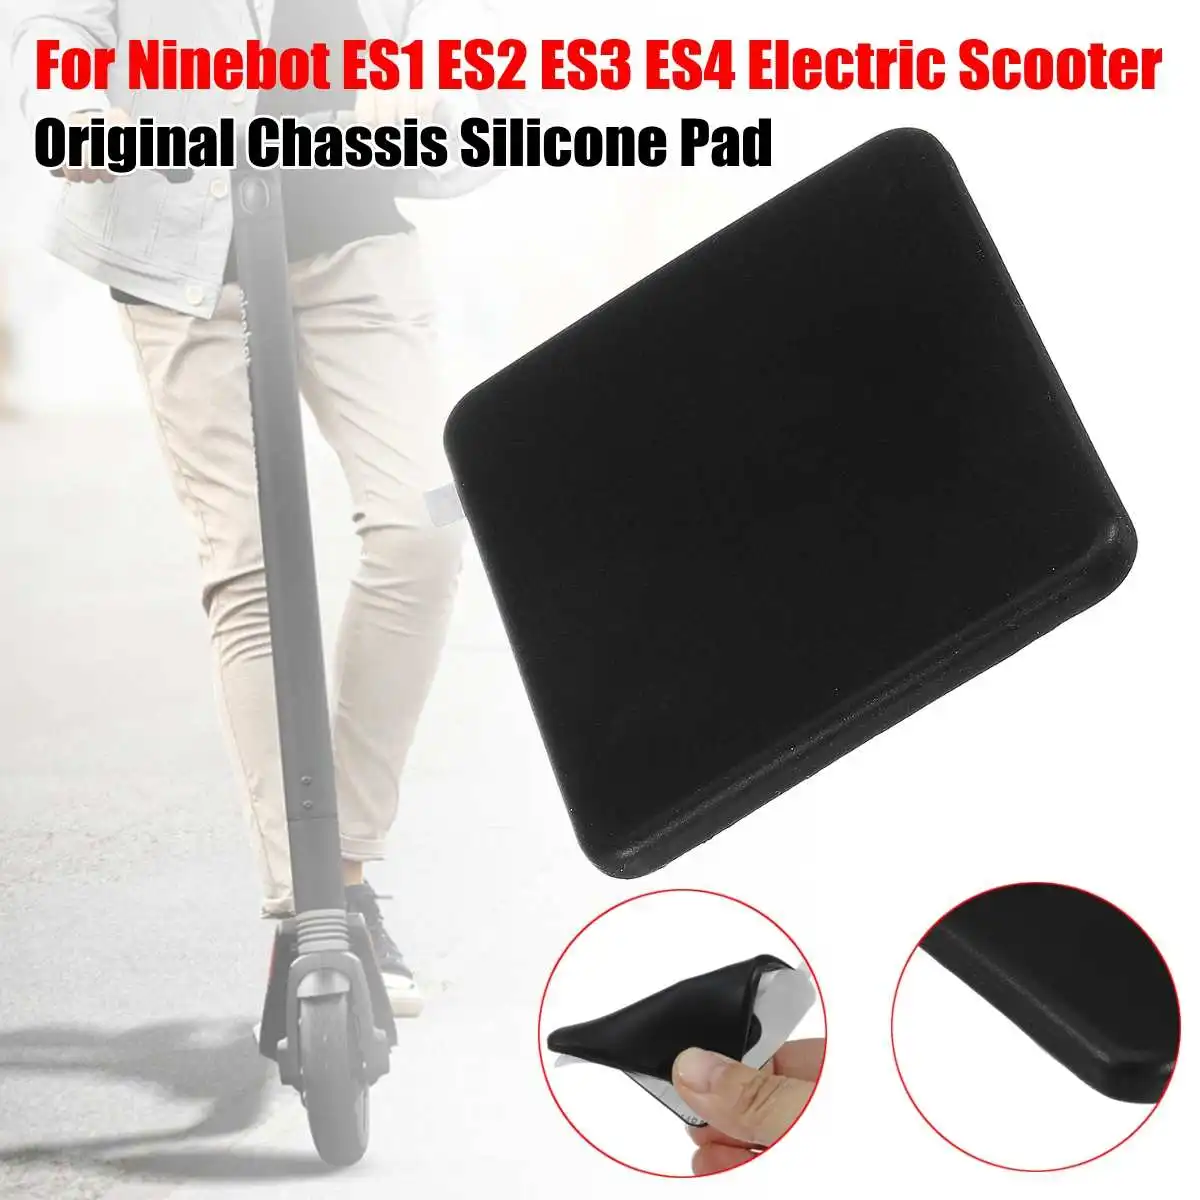 Chassis Silicone Pad for Ninebot ES1 ES2 ES3 ES4 Electric Scooter Accessories 